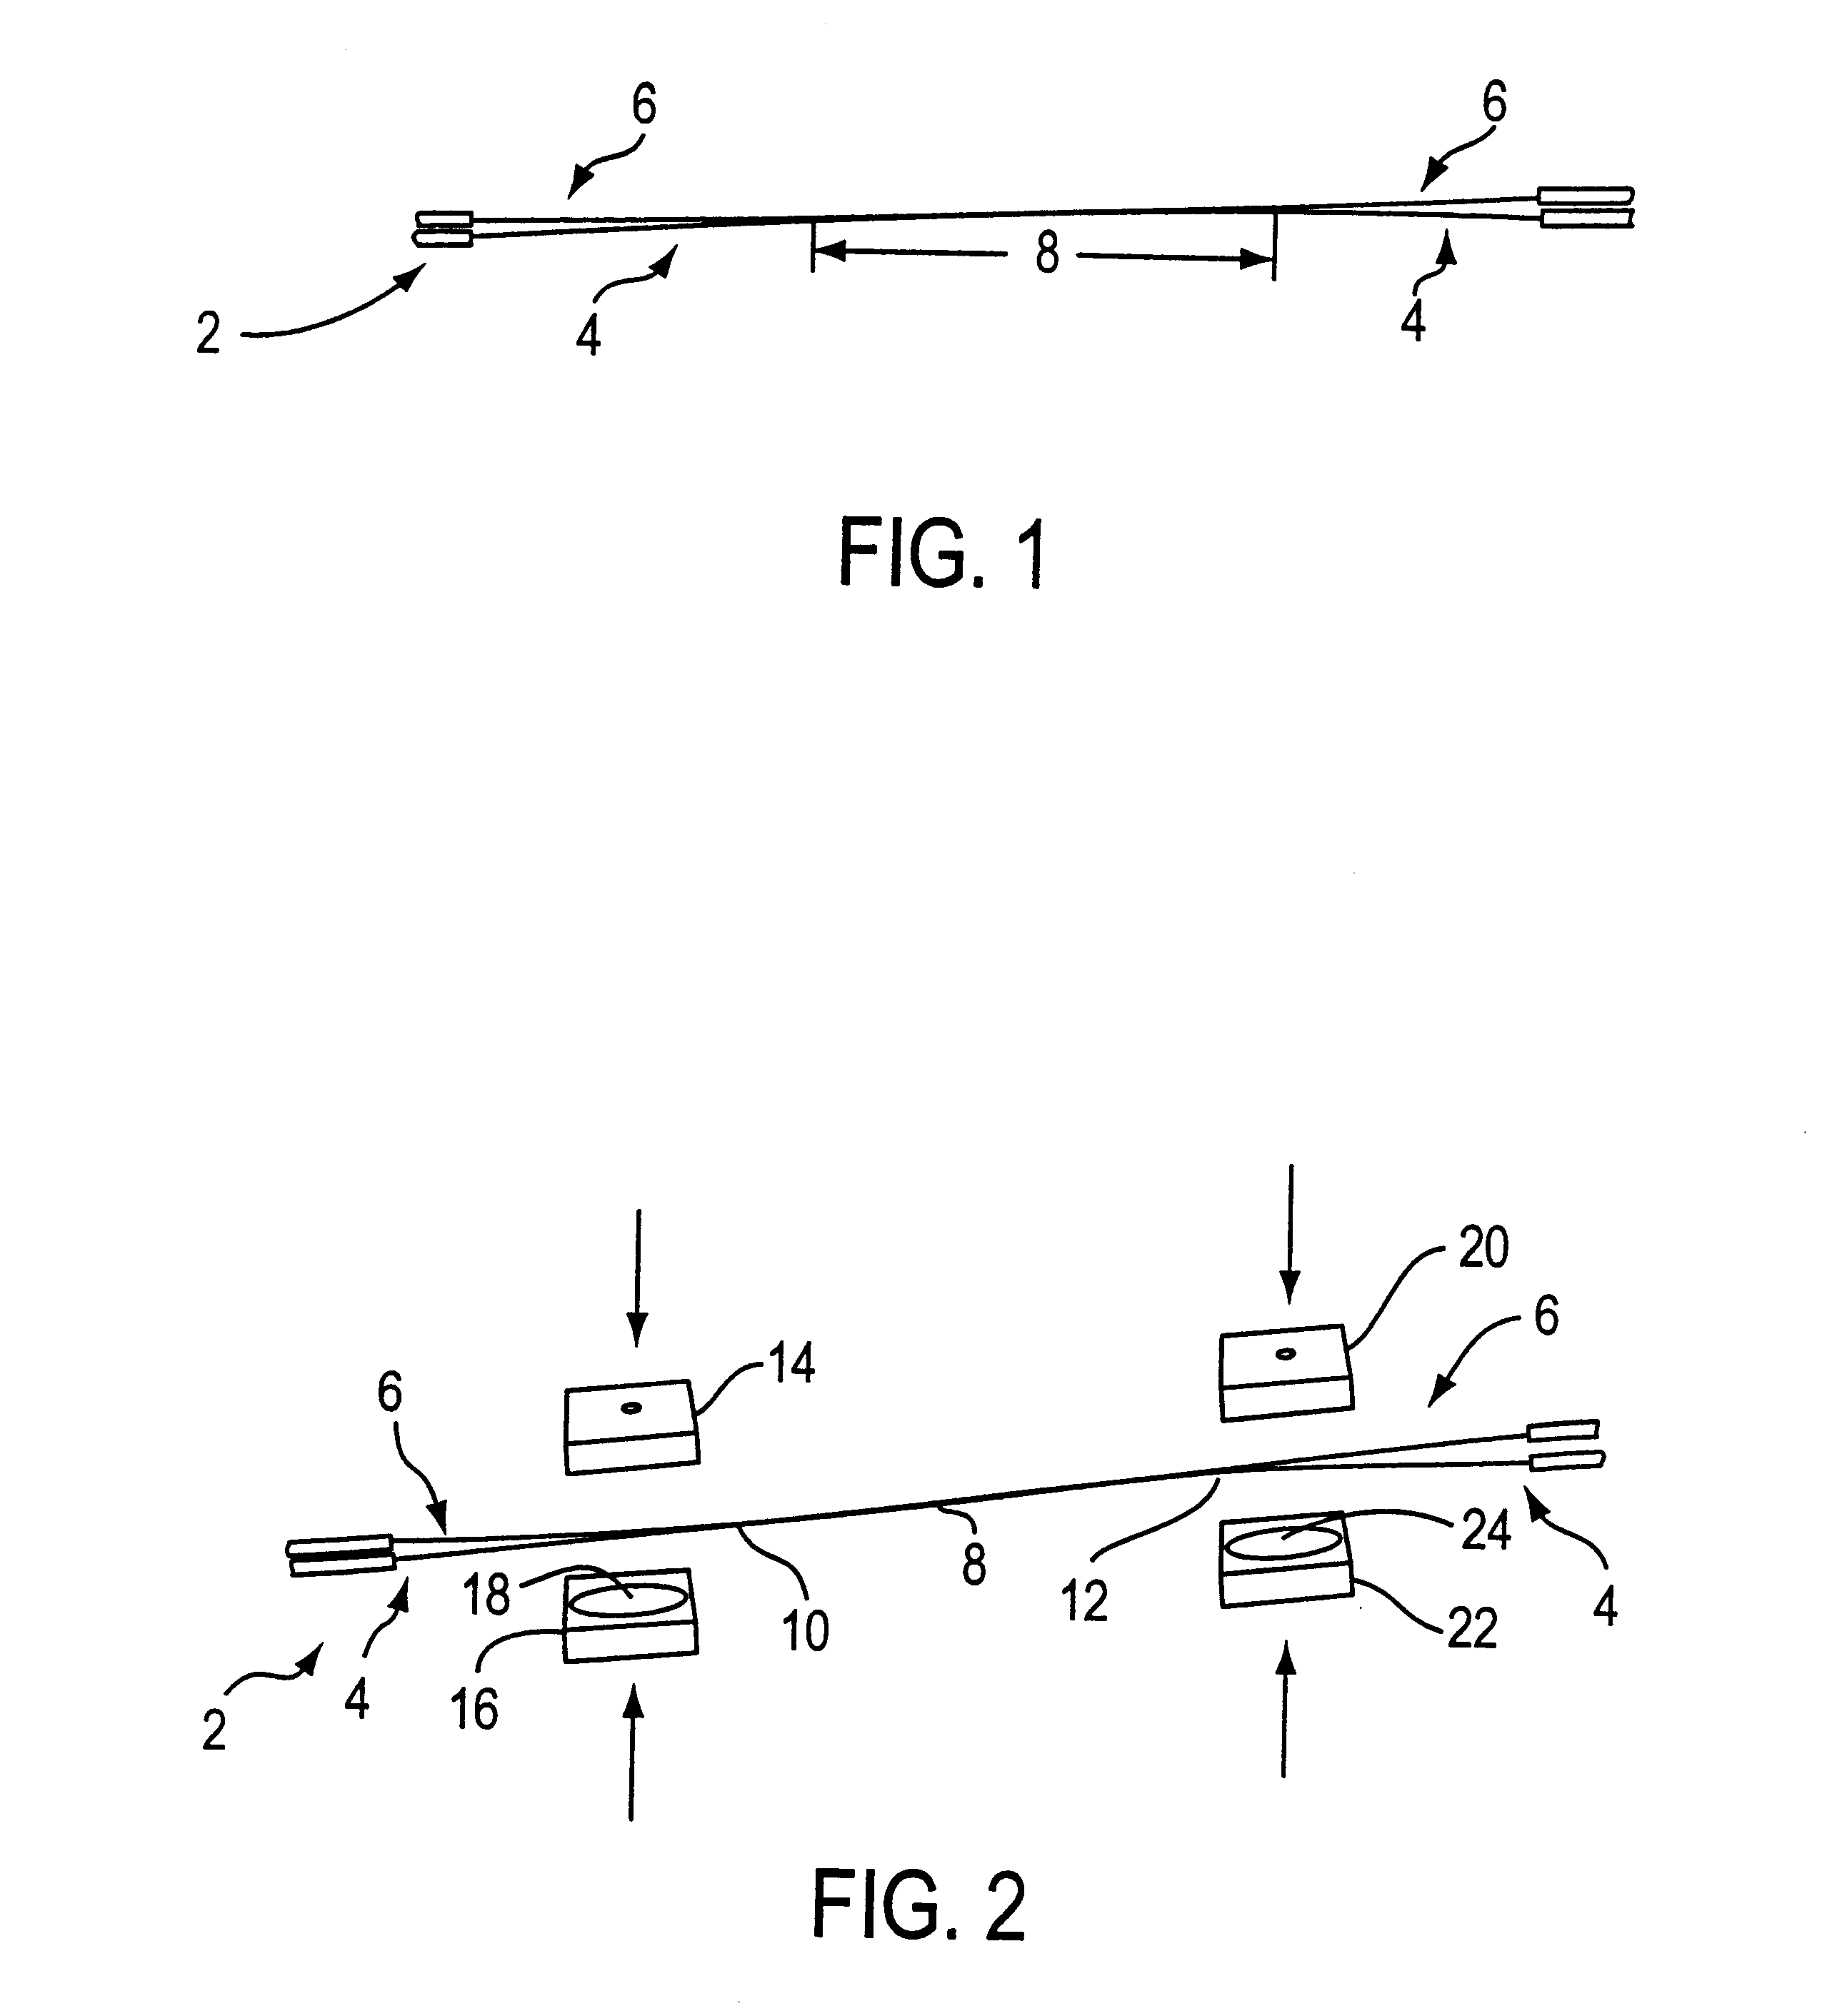 Apparatus and method bonding optical fiber and/or device to external element using compliant material interface